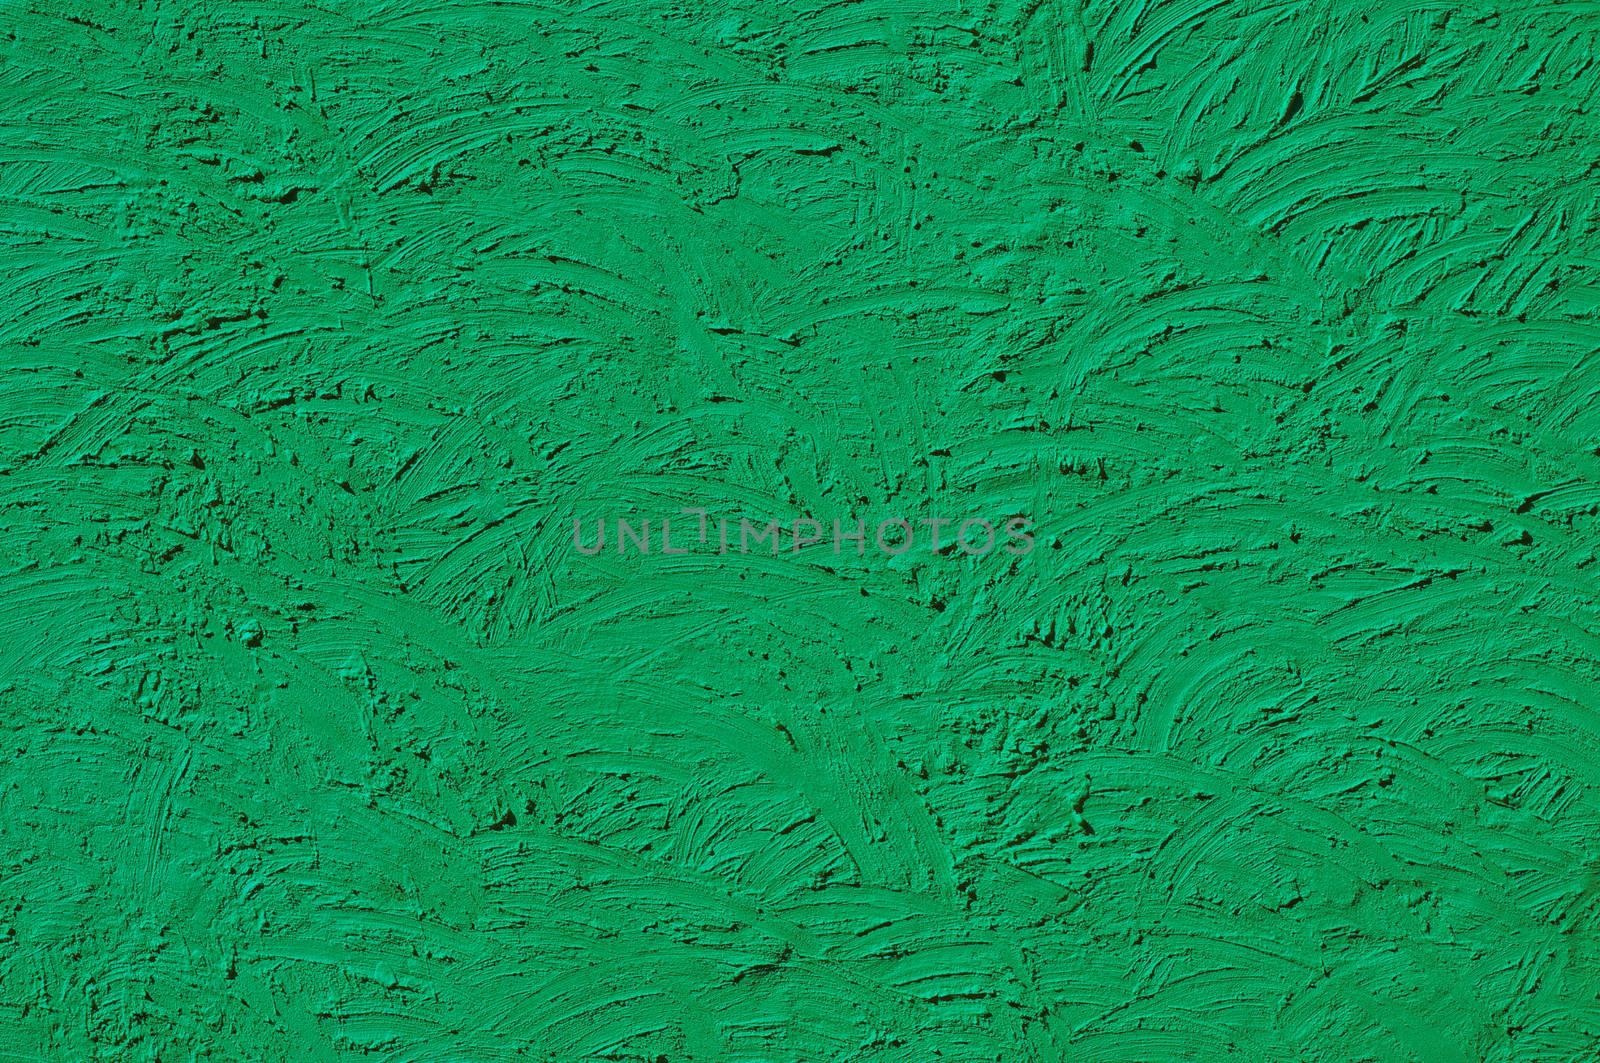 The texture of green walls painted large erratic strokes of paint                                  